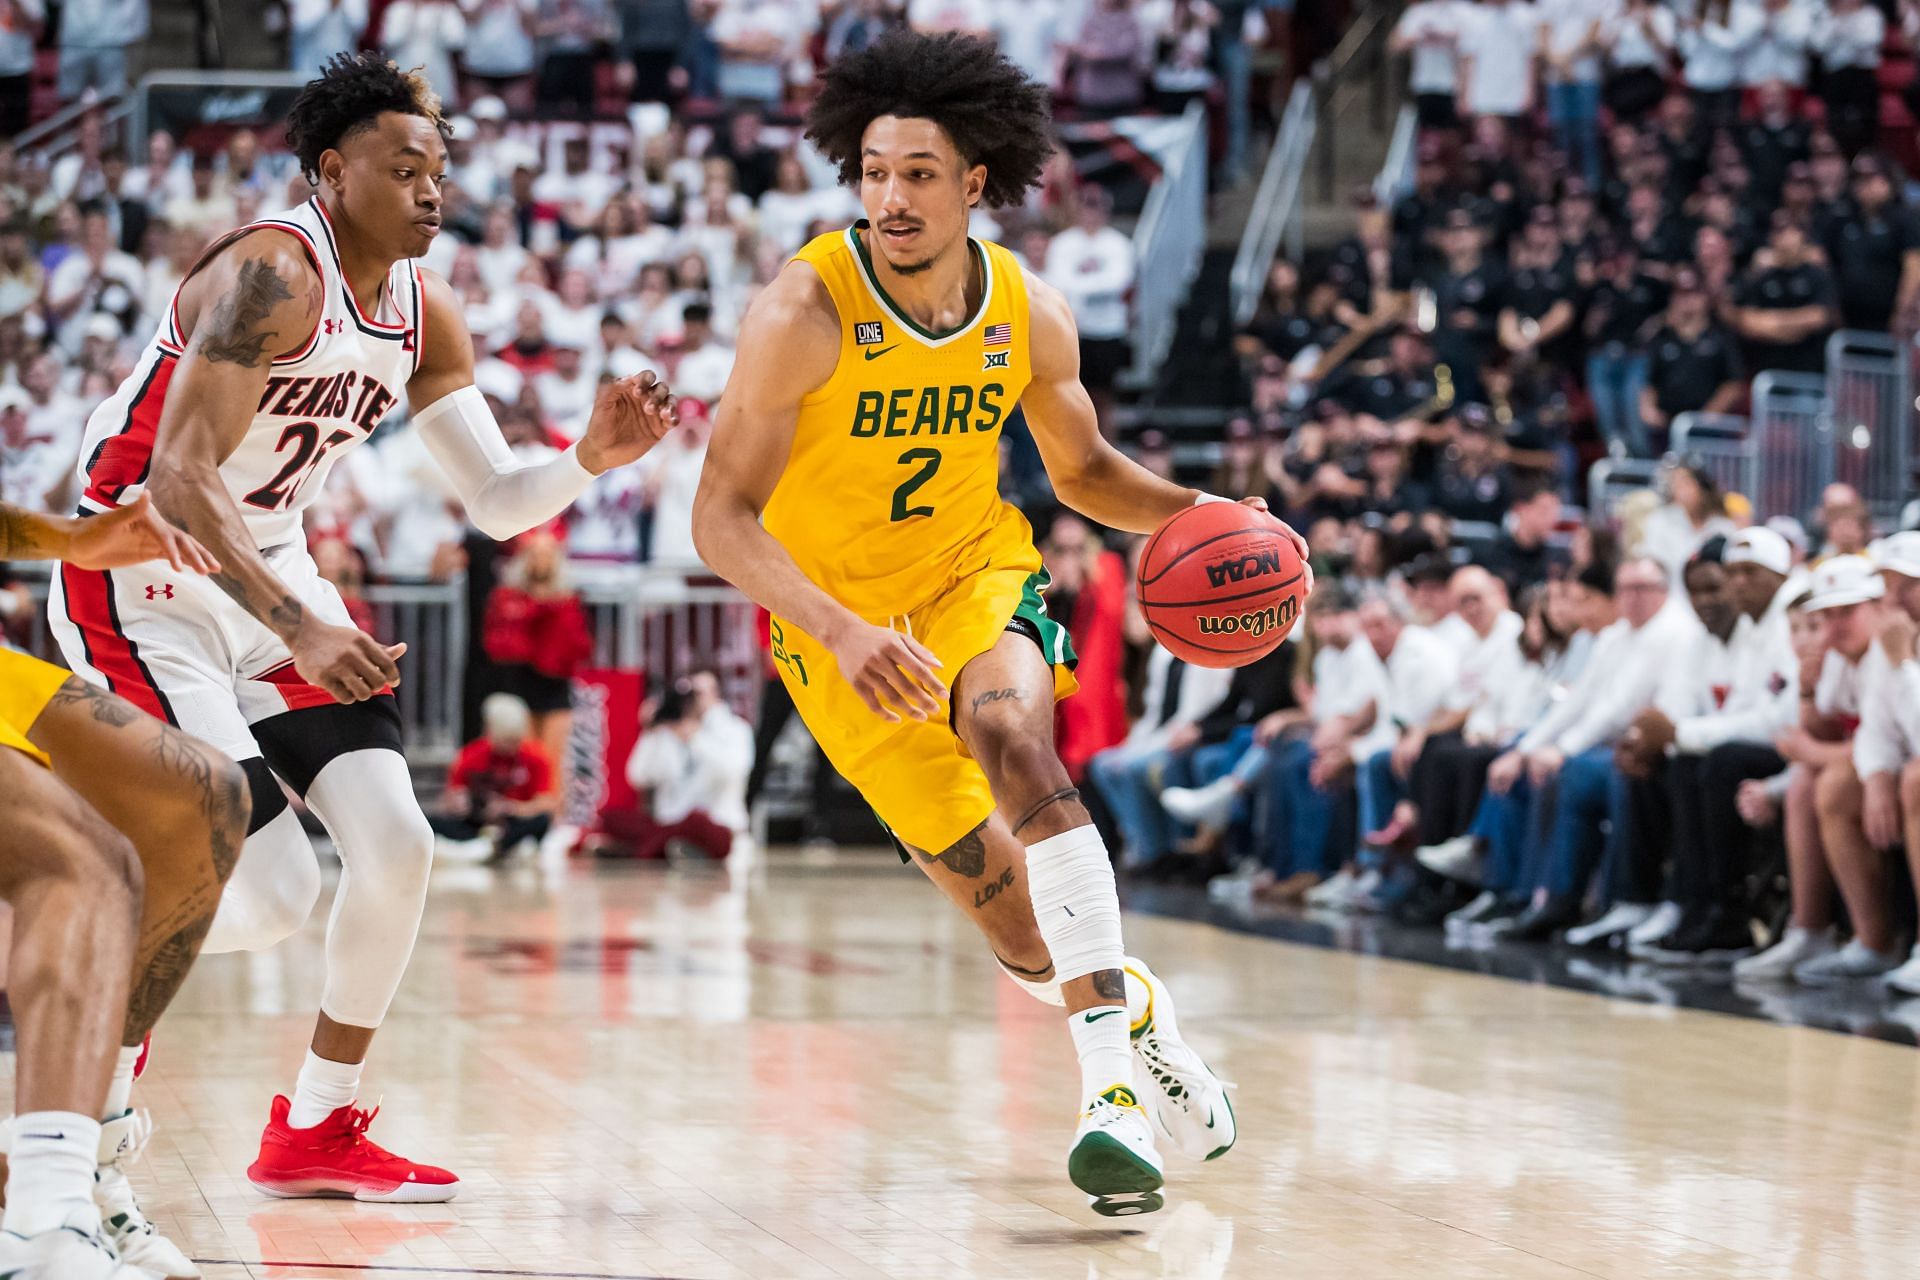 Baylor freshman Kendall Brown is heading to the NBA.